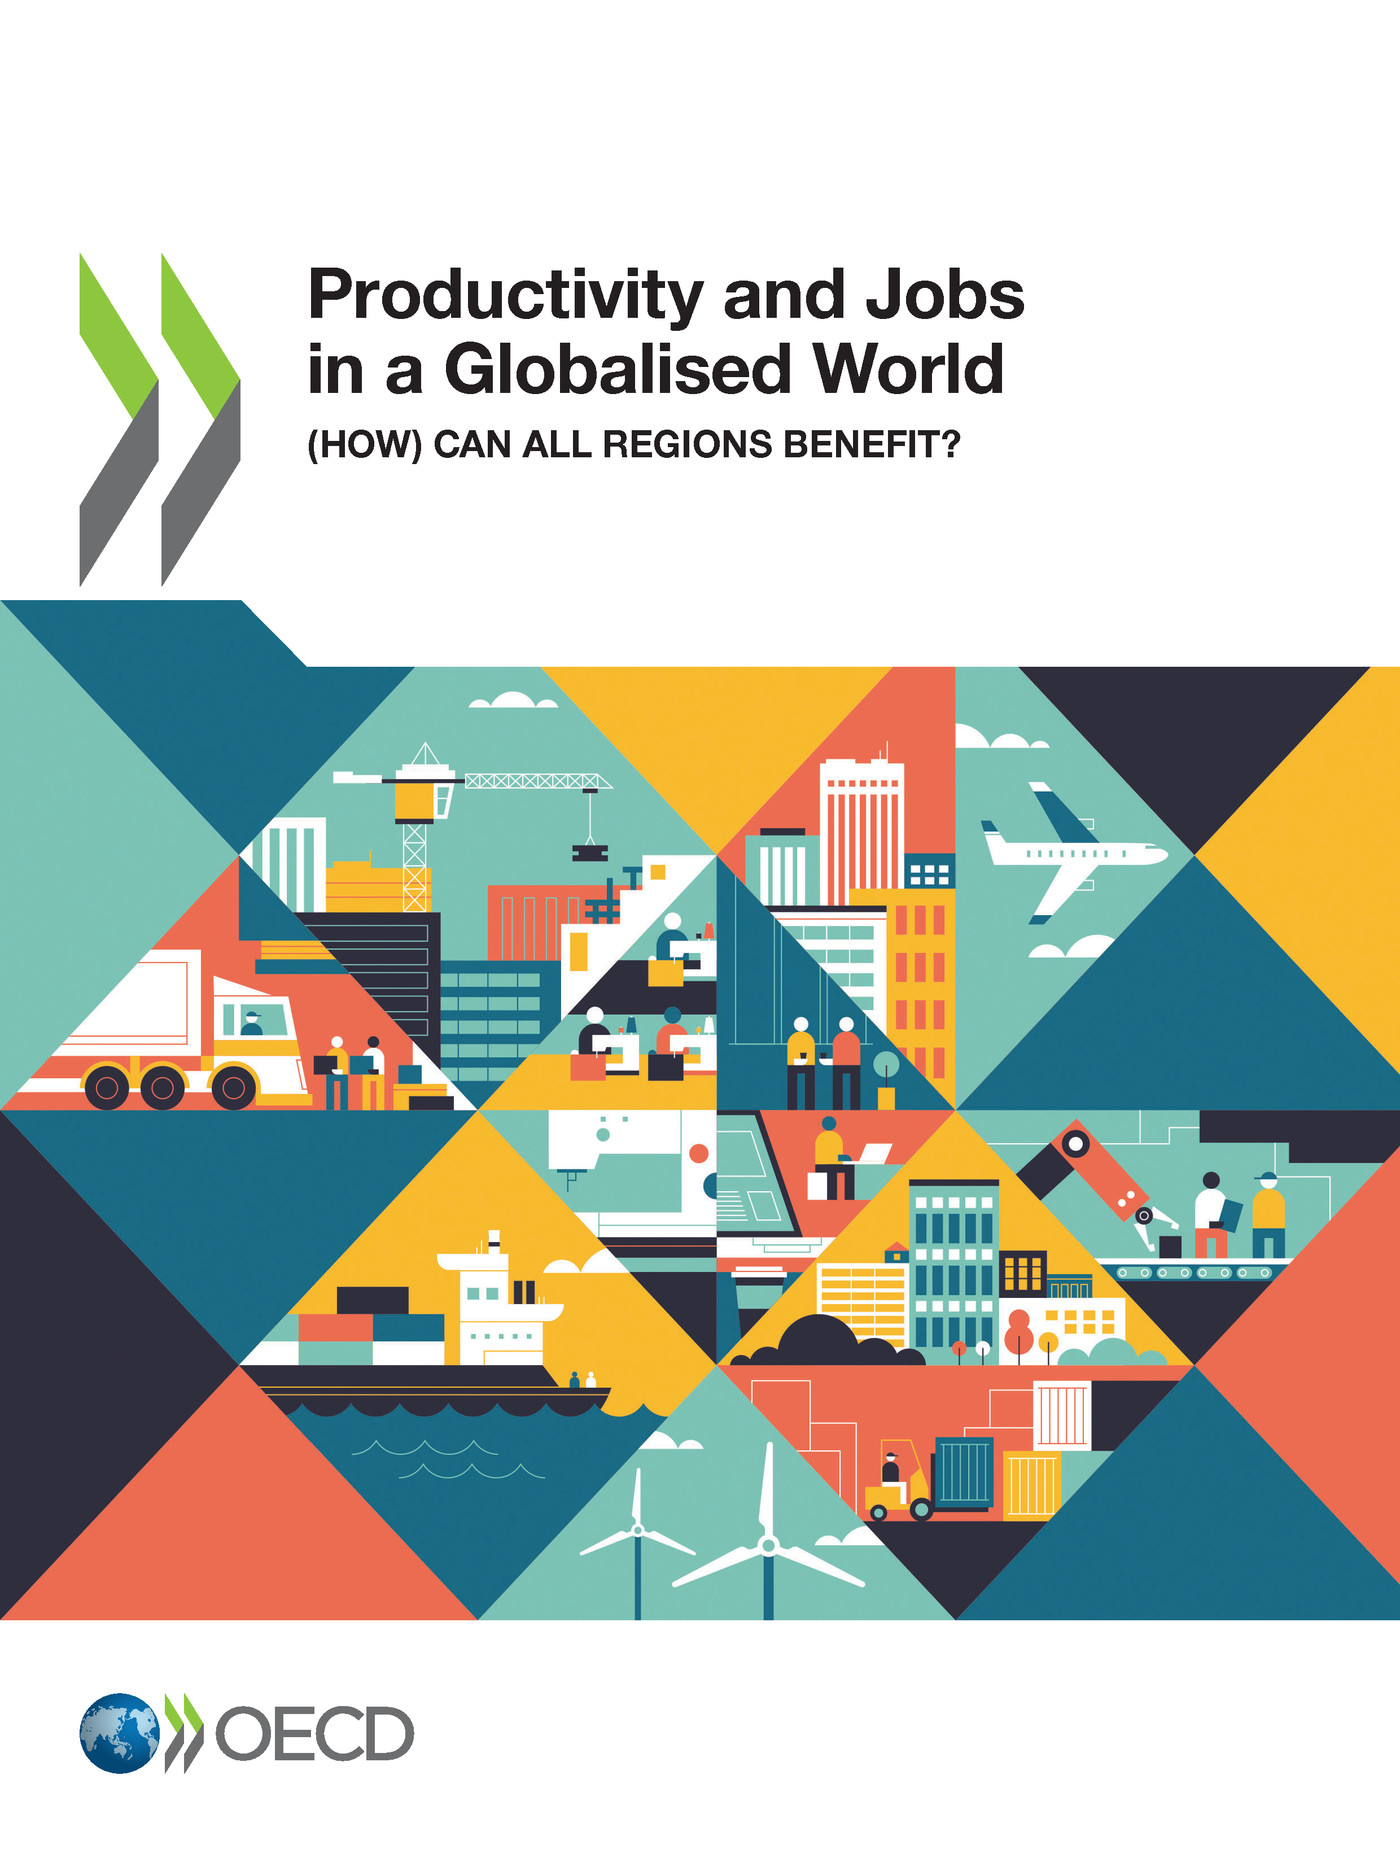 Productivity and Jobs in a Globalised World -  Collectif - OCDE / OECD